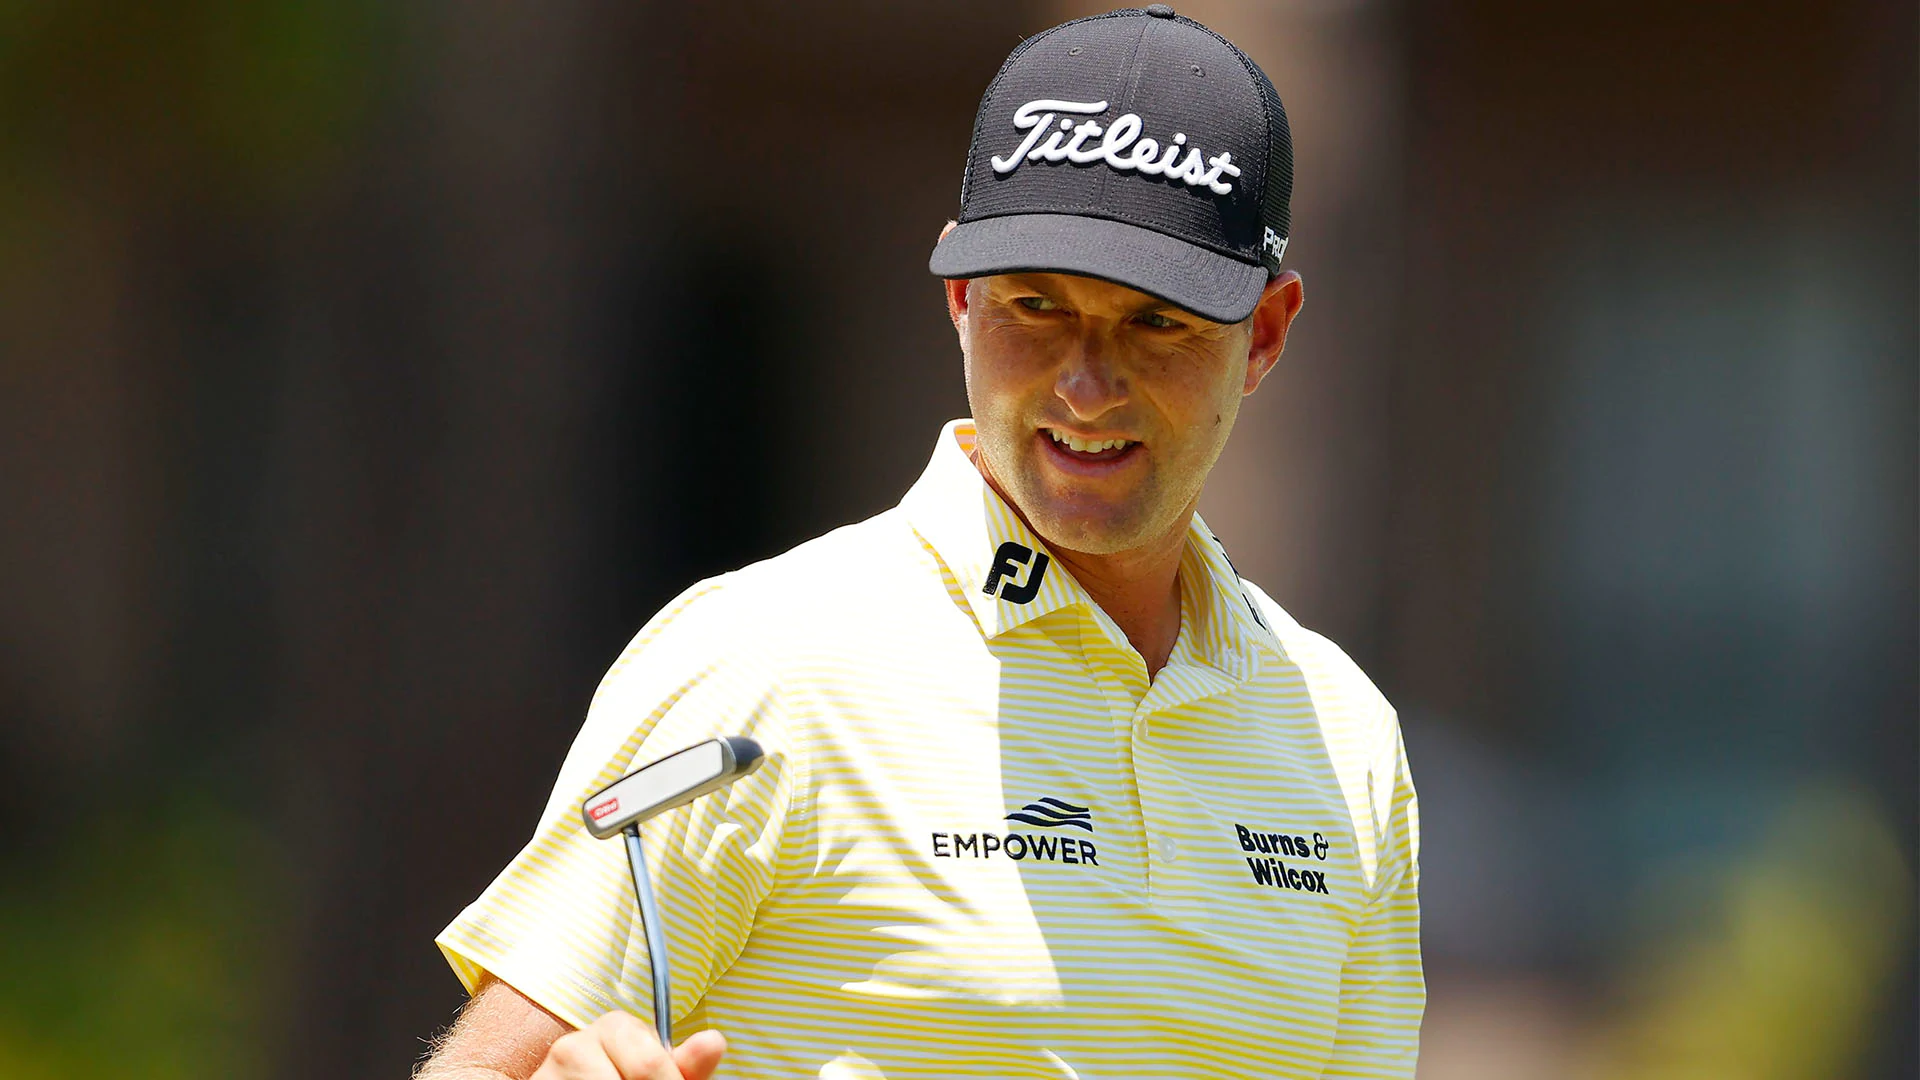 Webb Simpson (64) catches fire late, wins RBC Heritage at Harbour Town